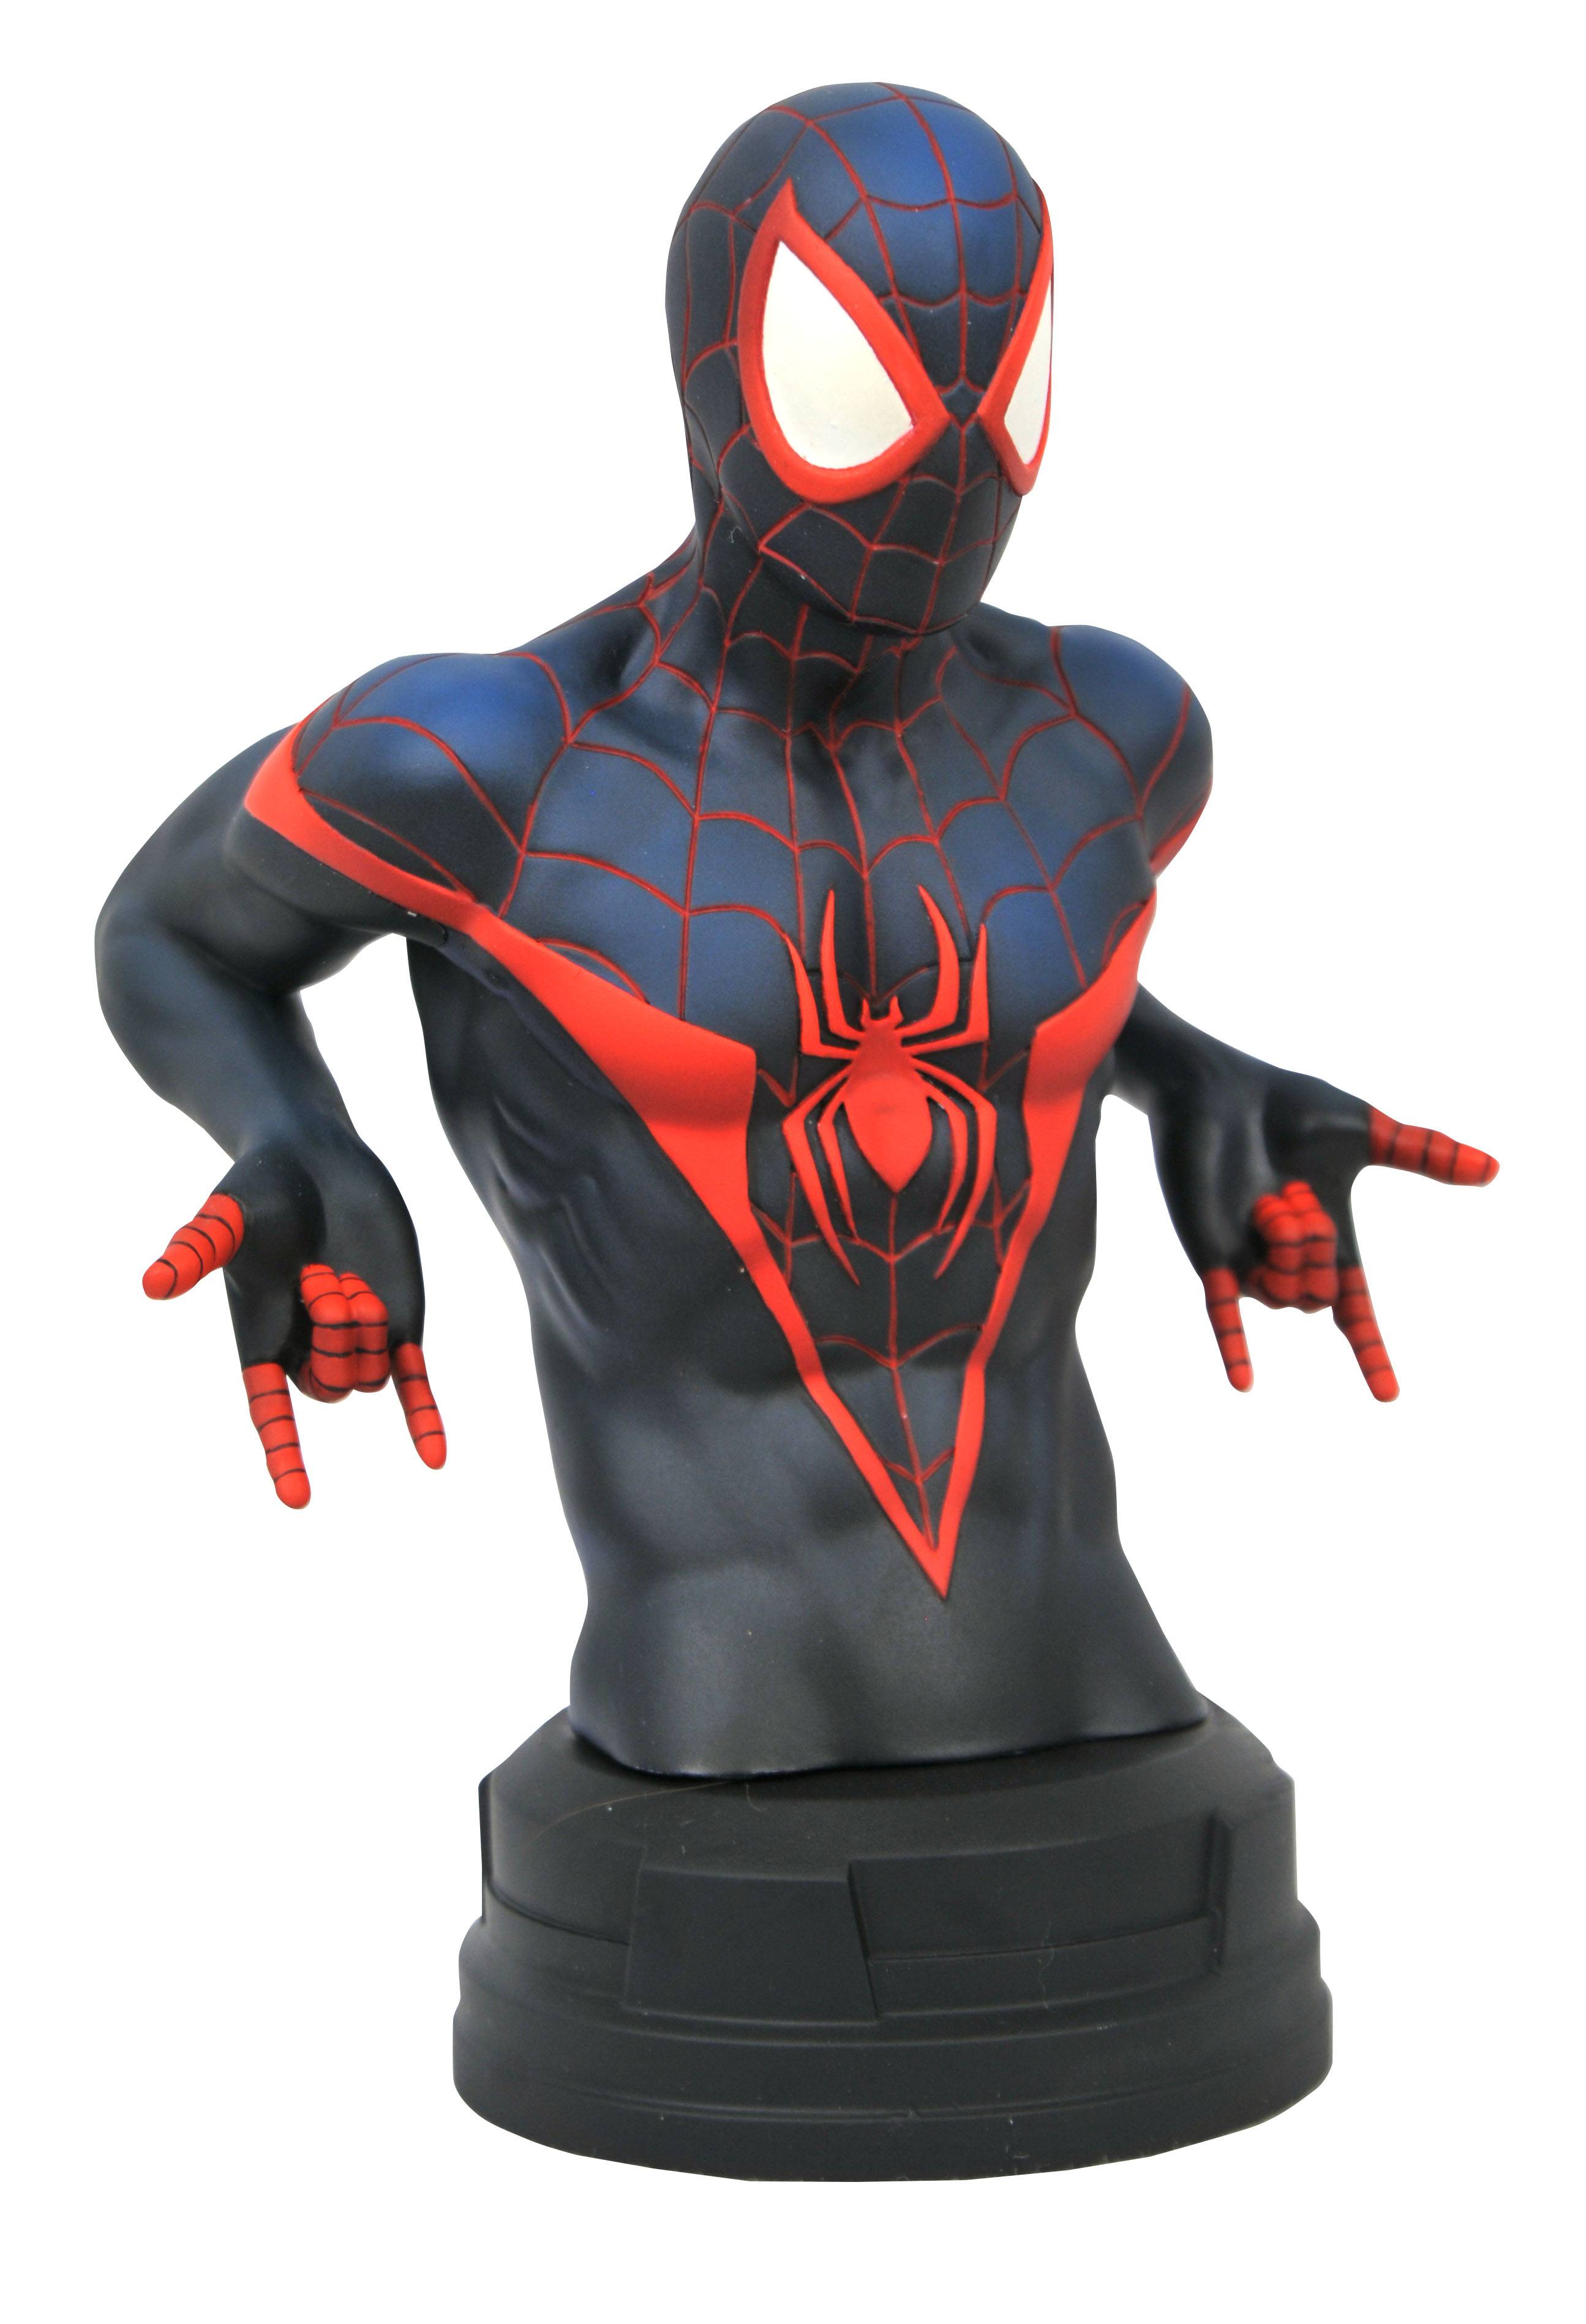 MARVEL COMIC MILES MORALES 1/6 SCALE BUST